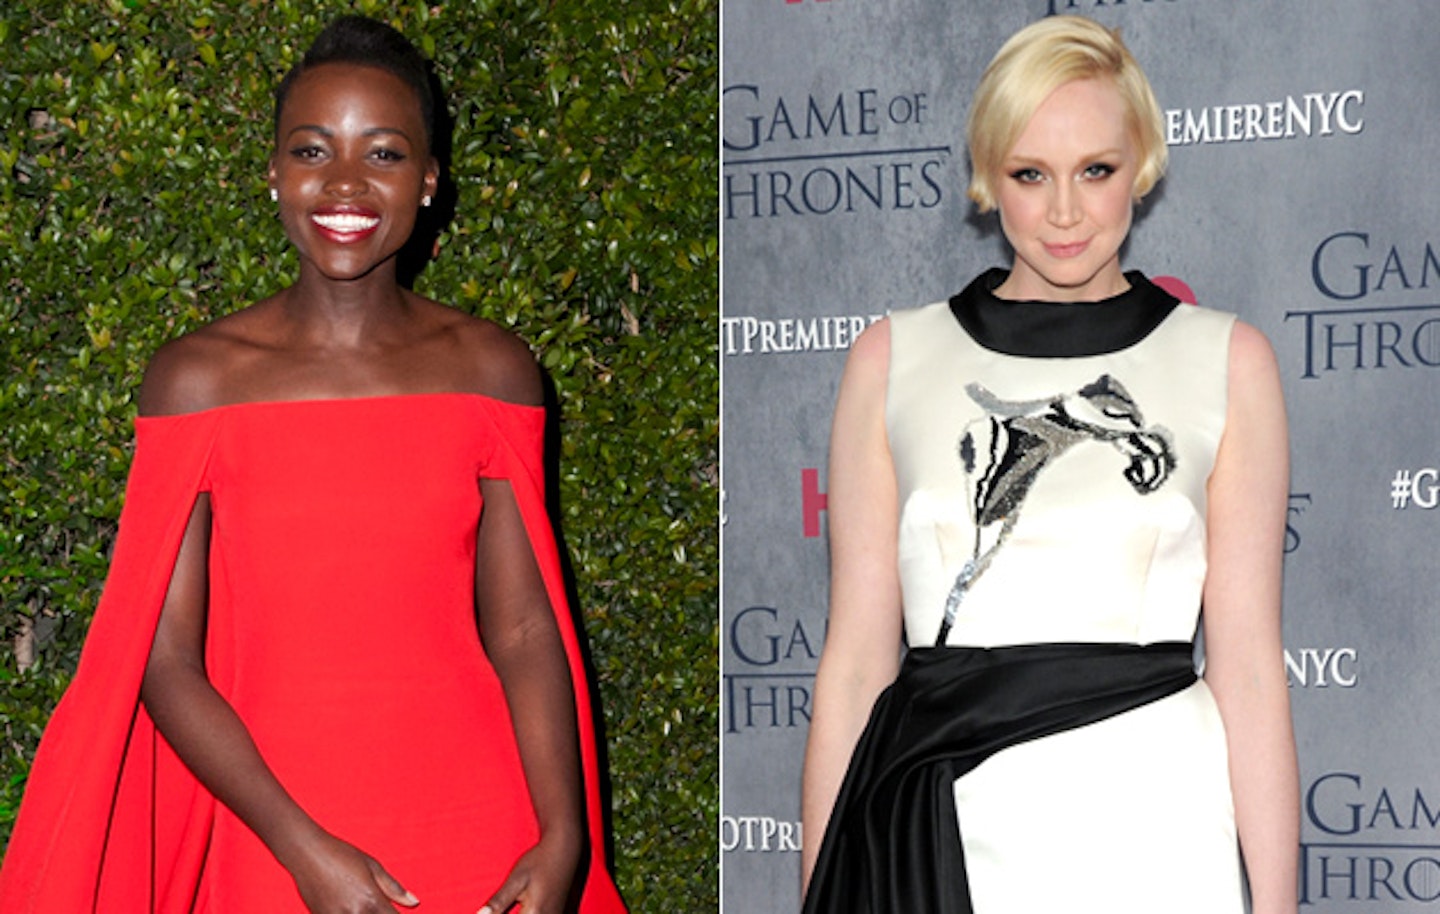 Lupita Nyong'o And Gwendoline Christie Join Star Wars: Episode VII